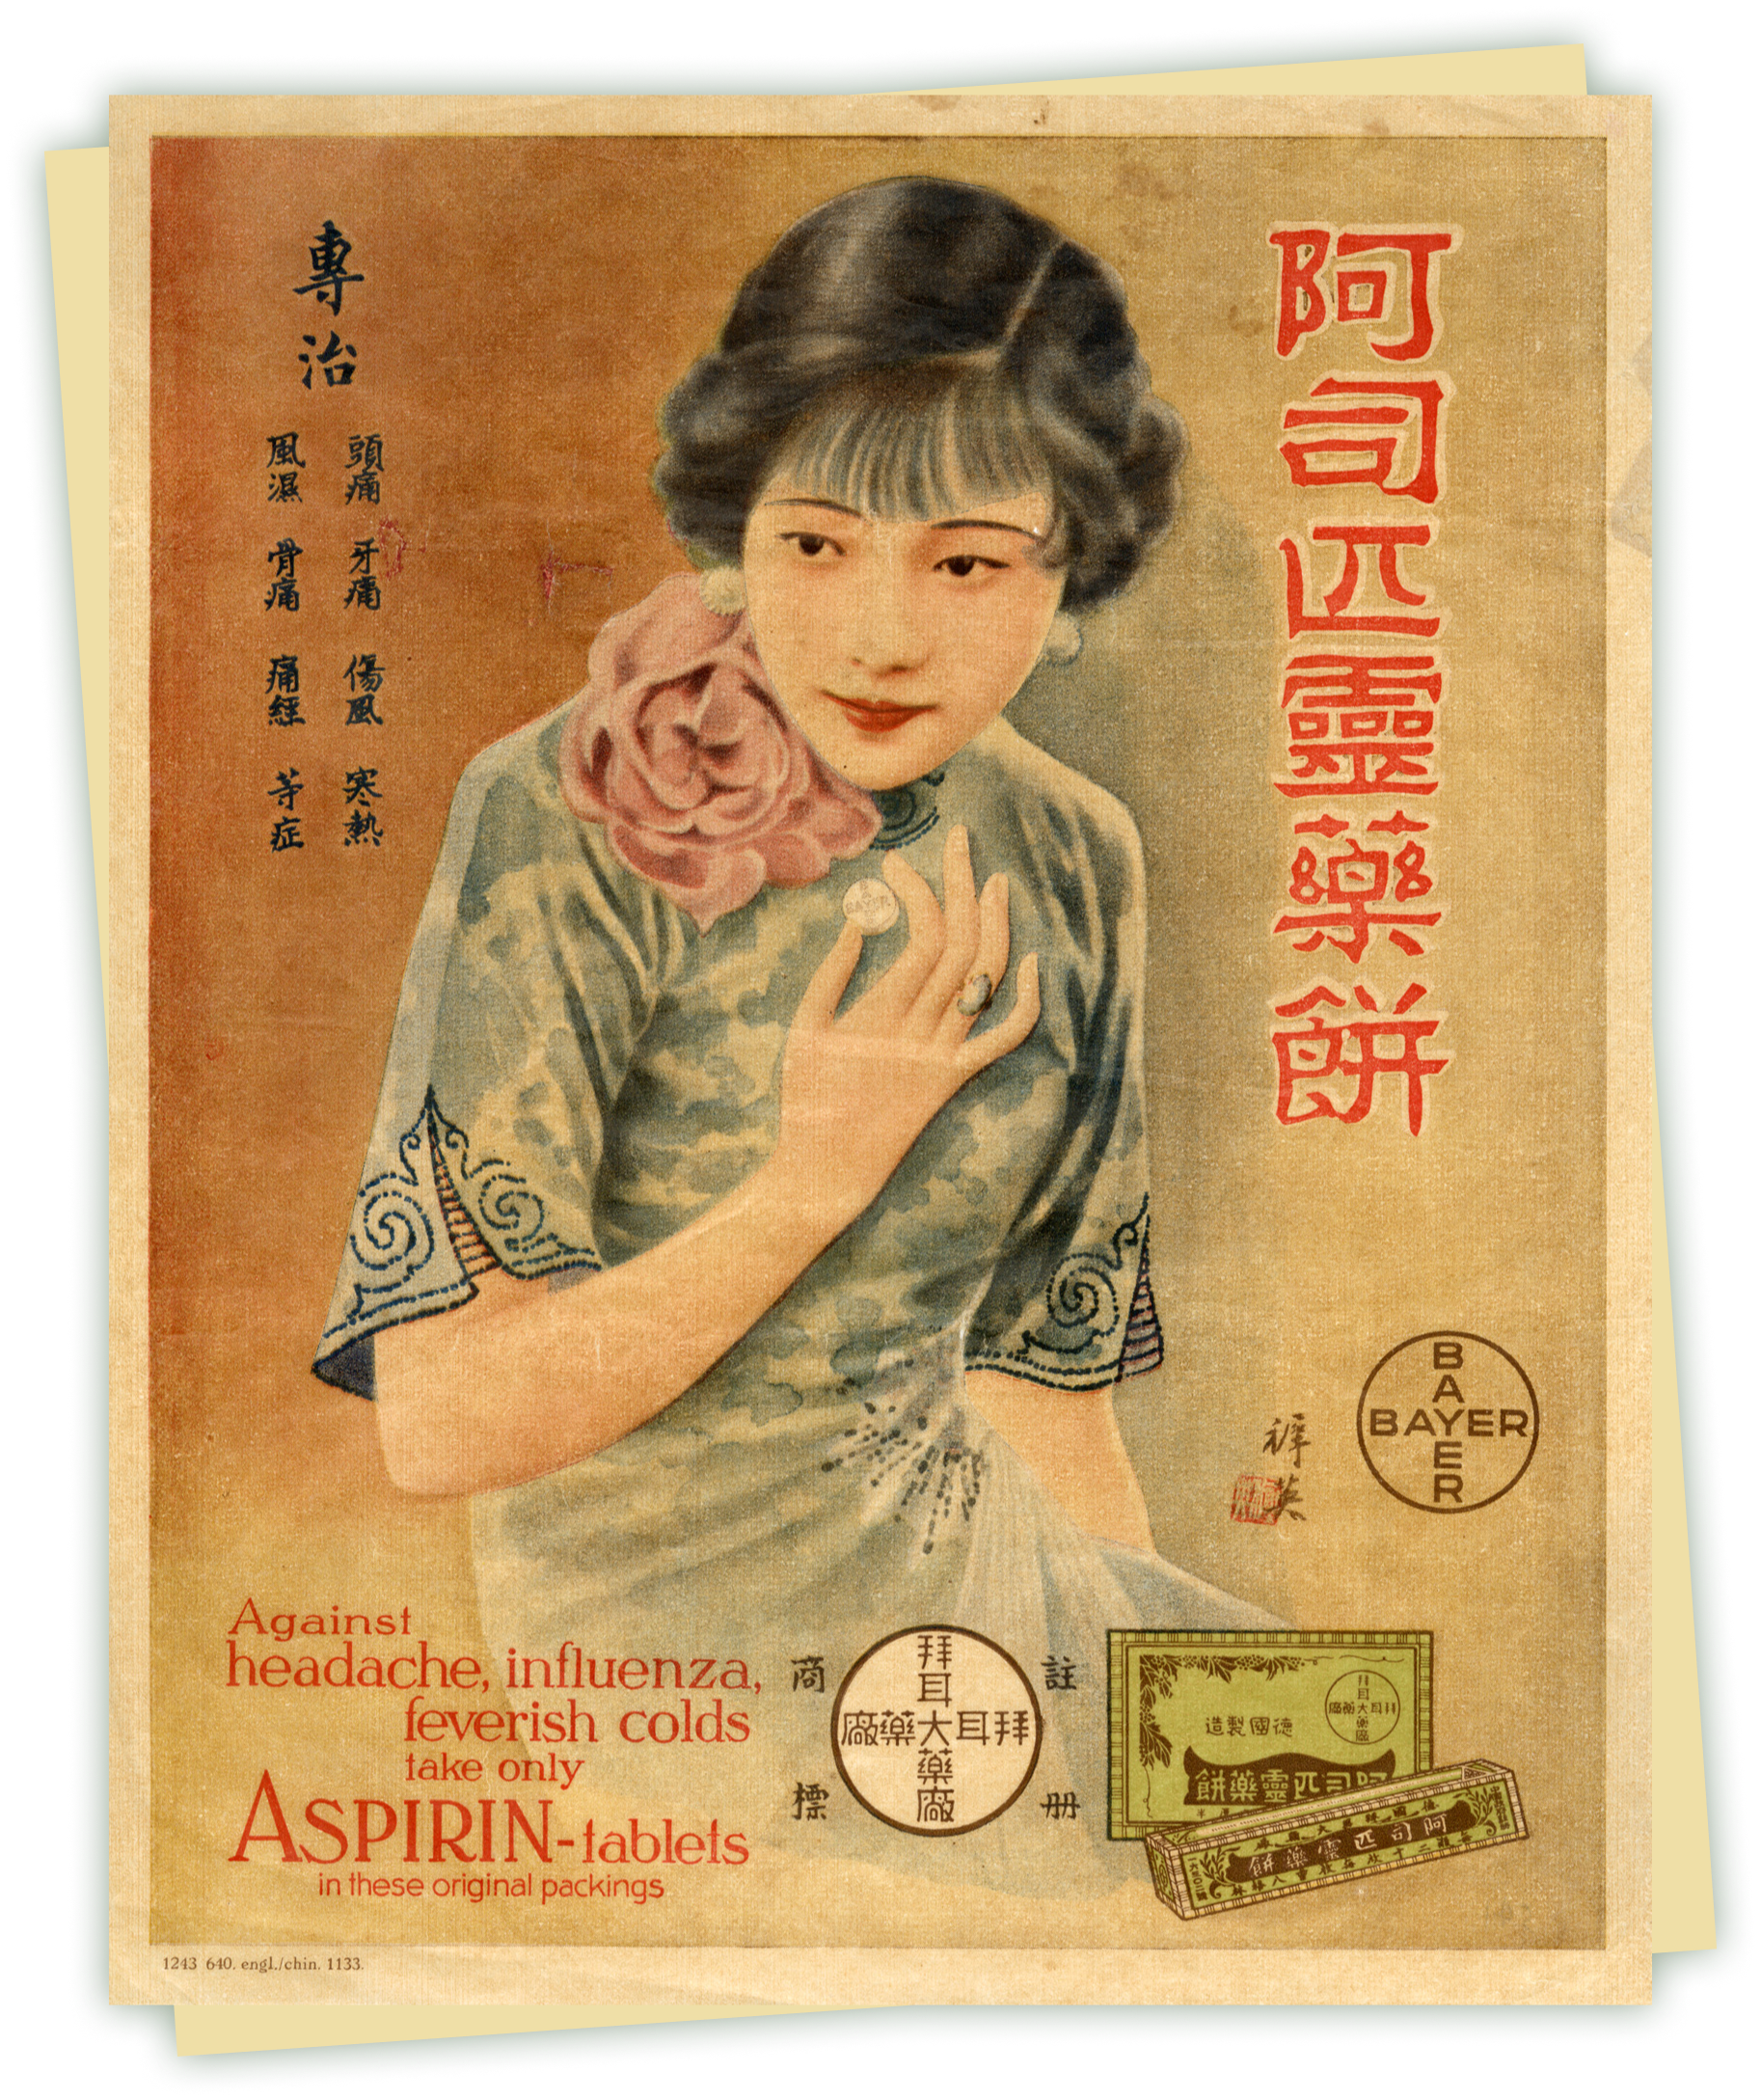 A Bayer advertisement featuring an illustration of a Chinese woman, a package of Bayer aspirin, and some text 